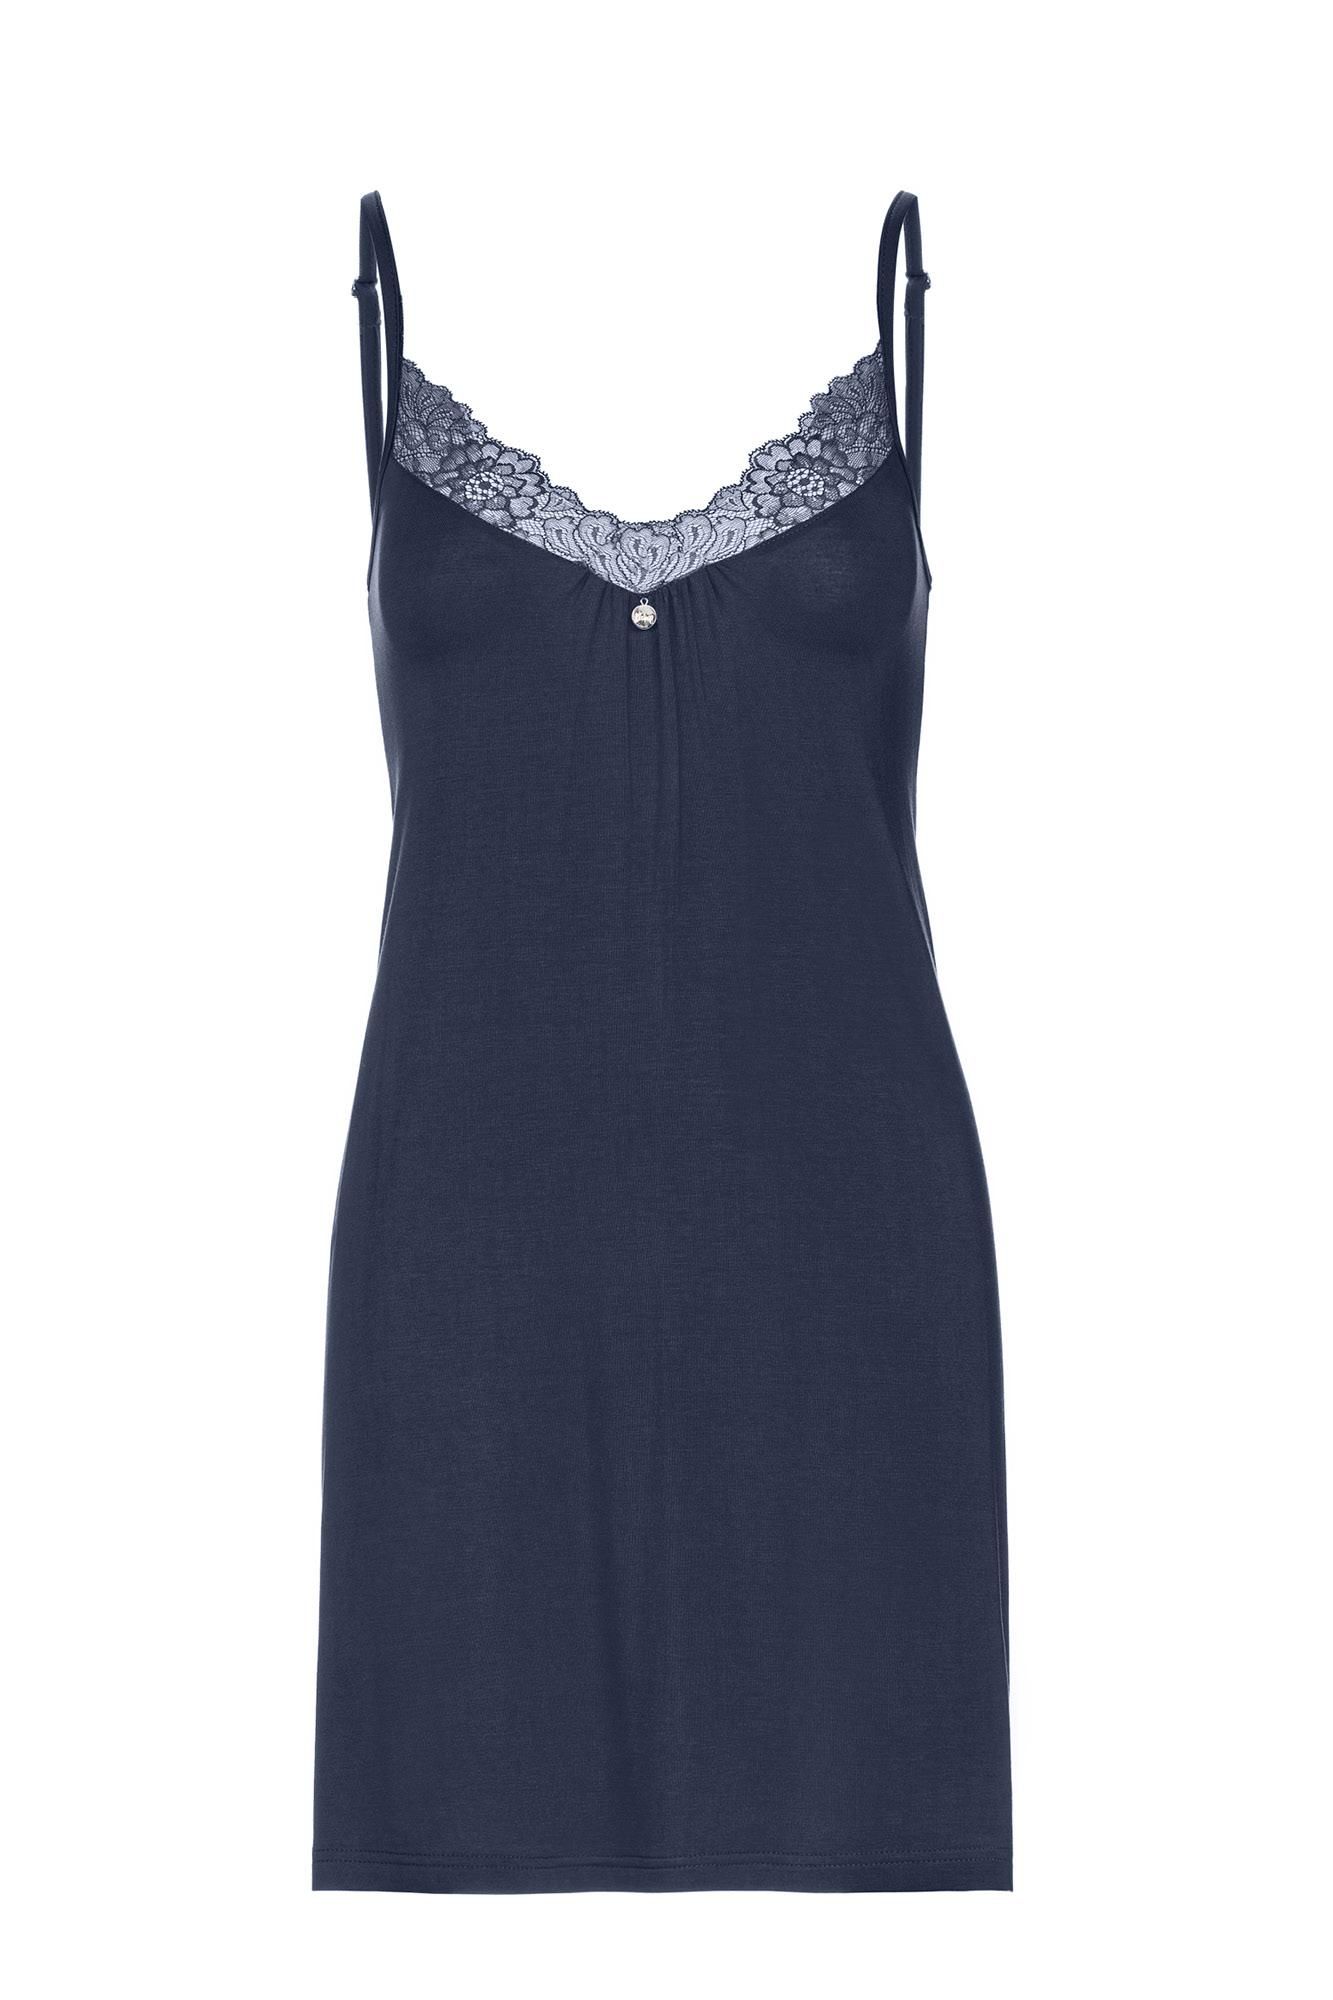 Women’s Sleeveless Nightgown with Lace Details